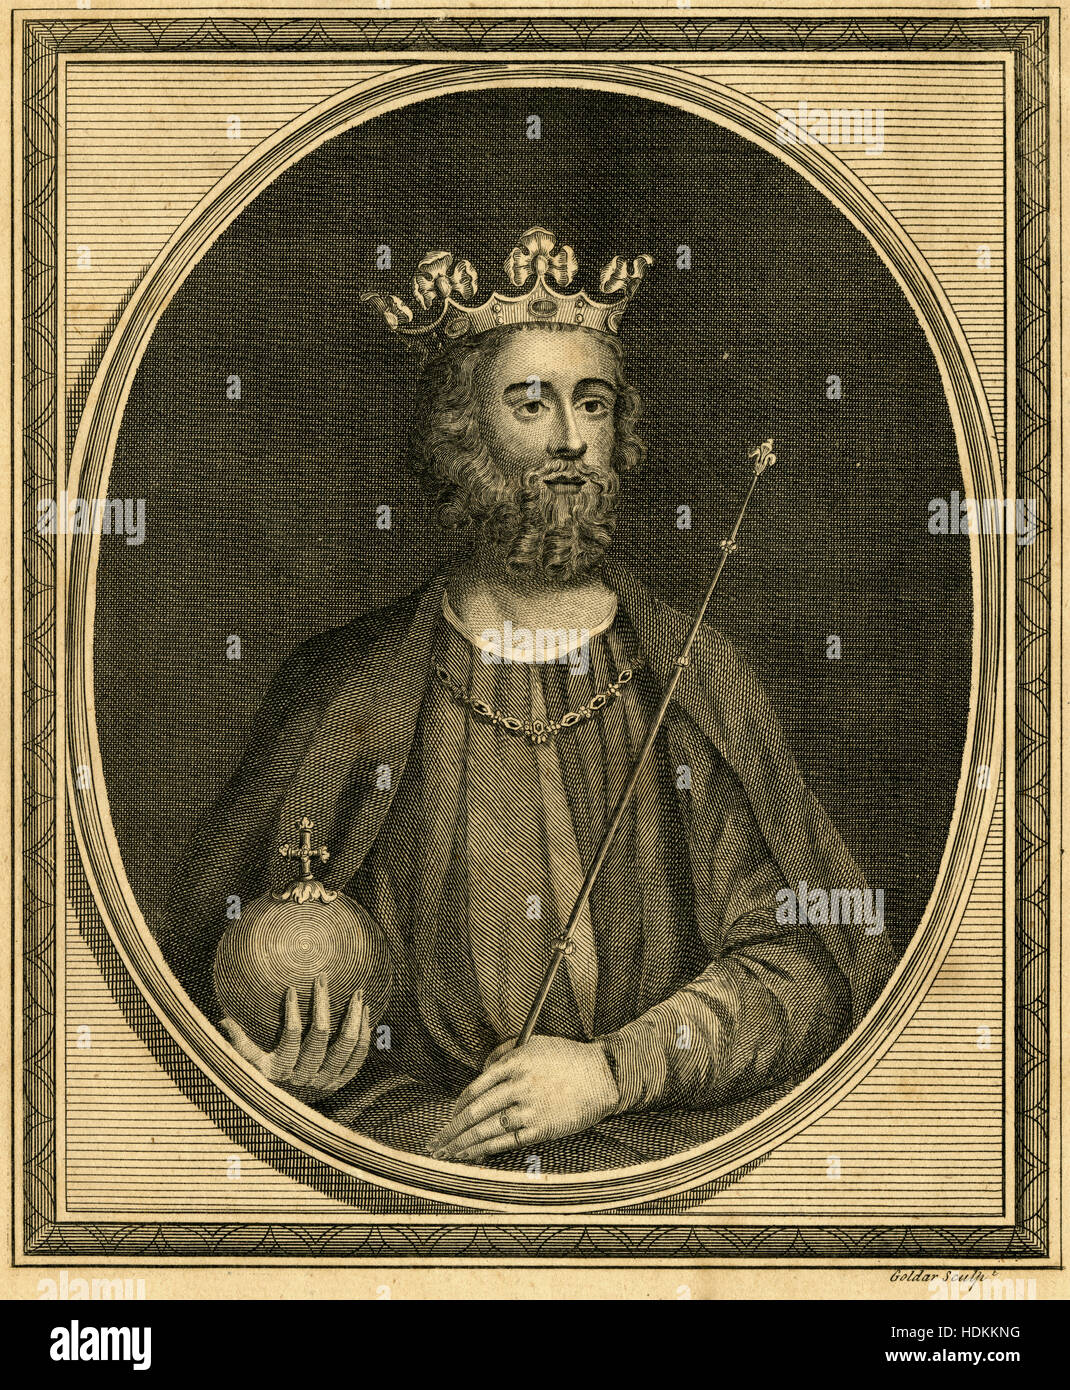 Antique 1787 engraving, King Edward II. Edward II (1284-1327), also called Edward of Caernarfon, was King of England from 1307 until he was deposed in January 1327. SOURCE: ORIGINAL ENGRAVING. Stock Photo